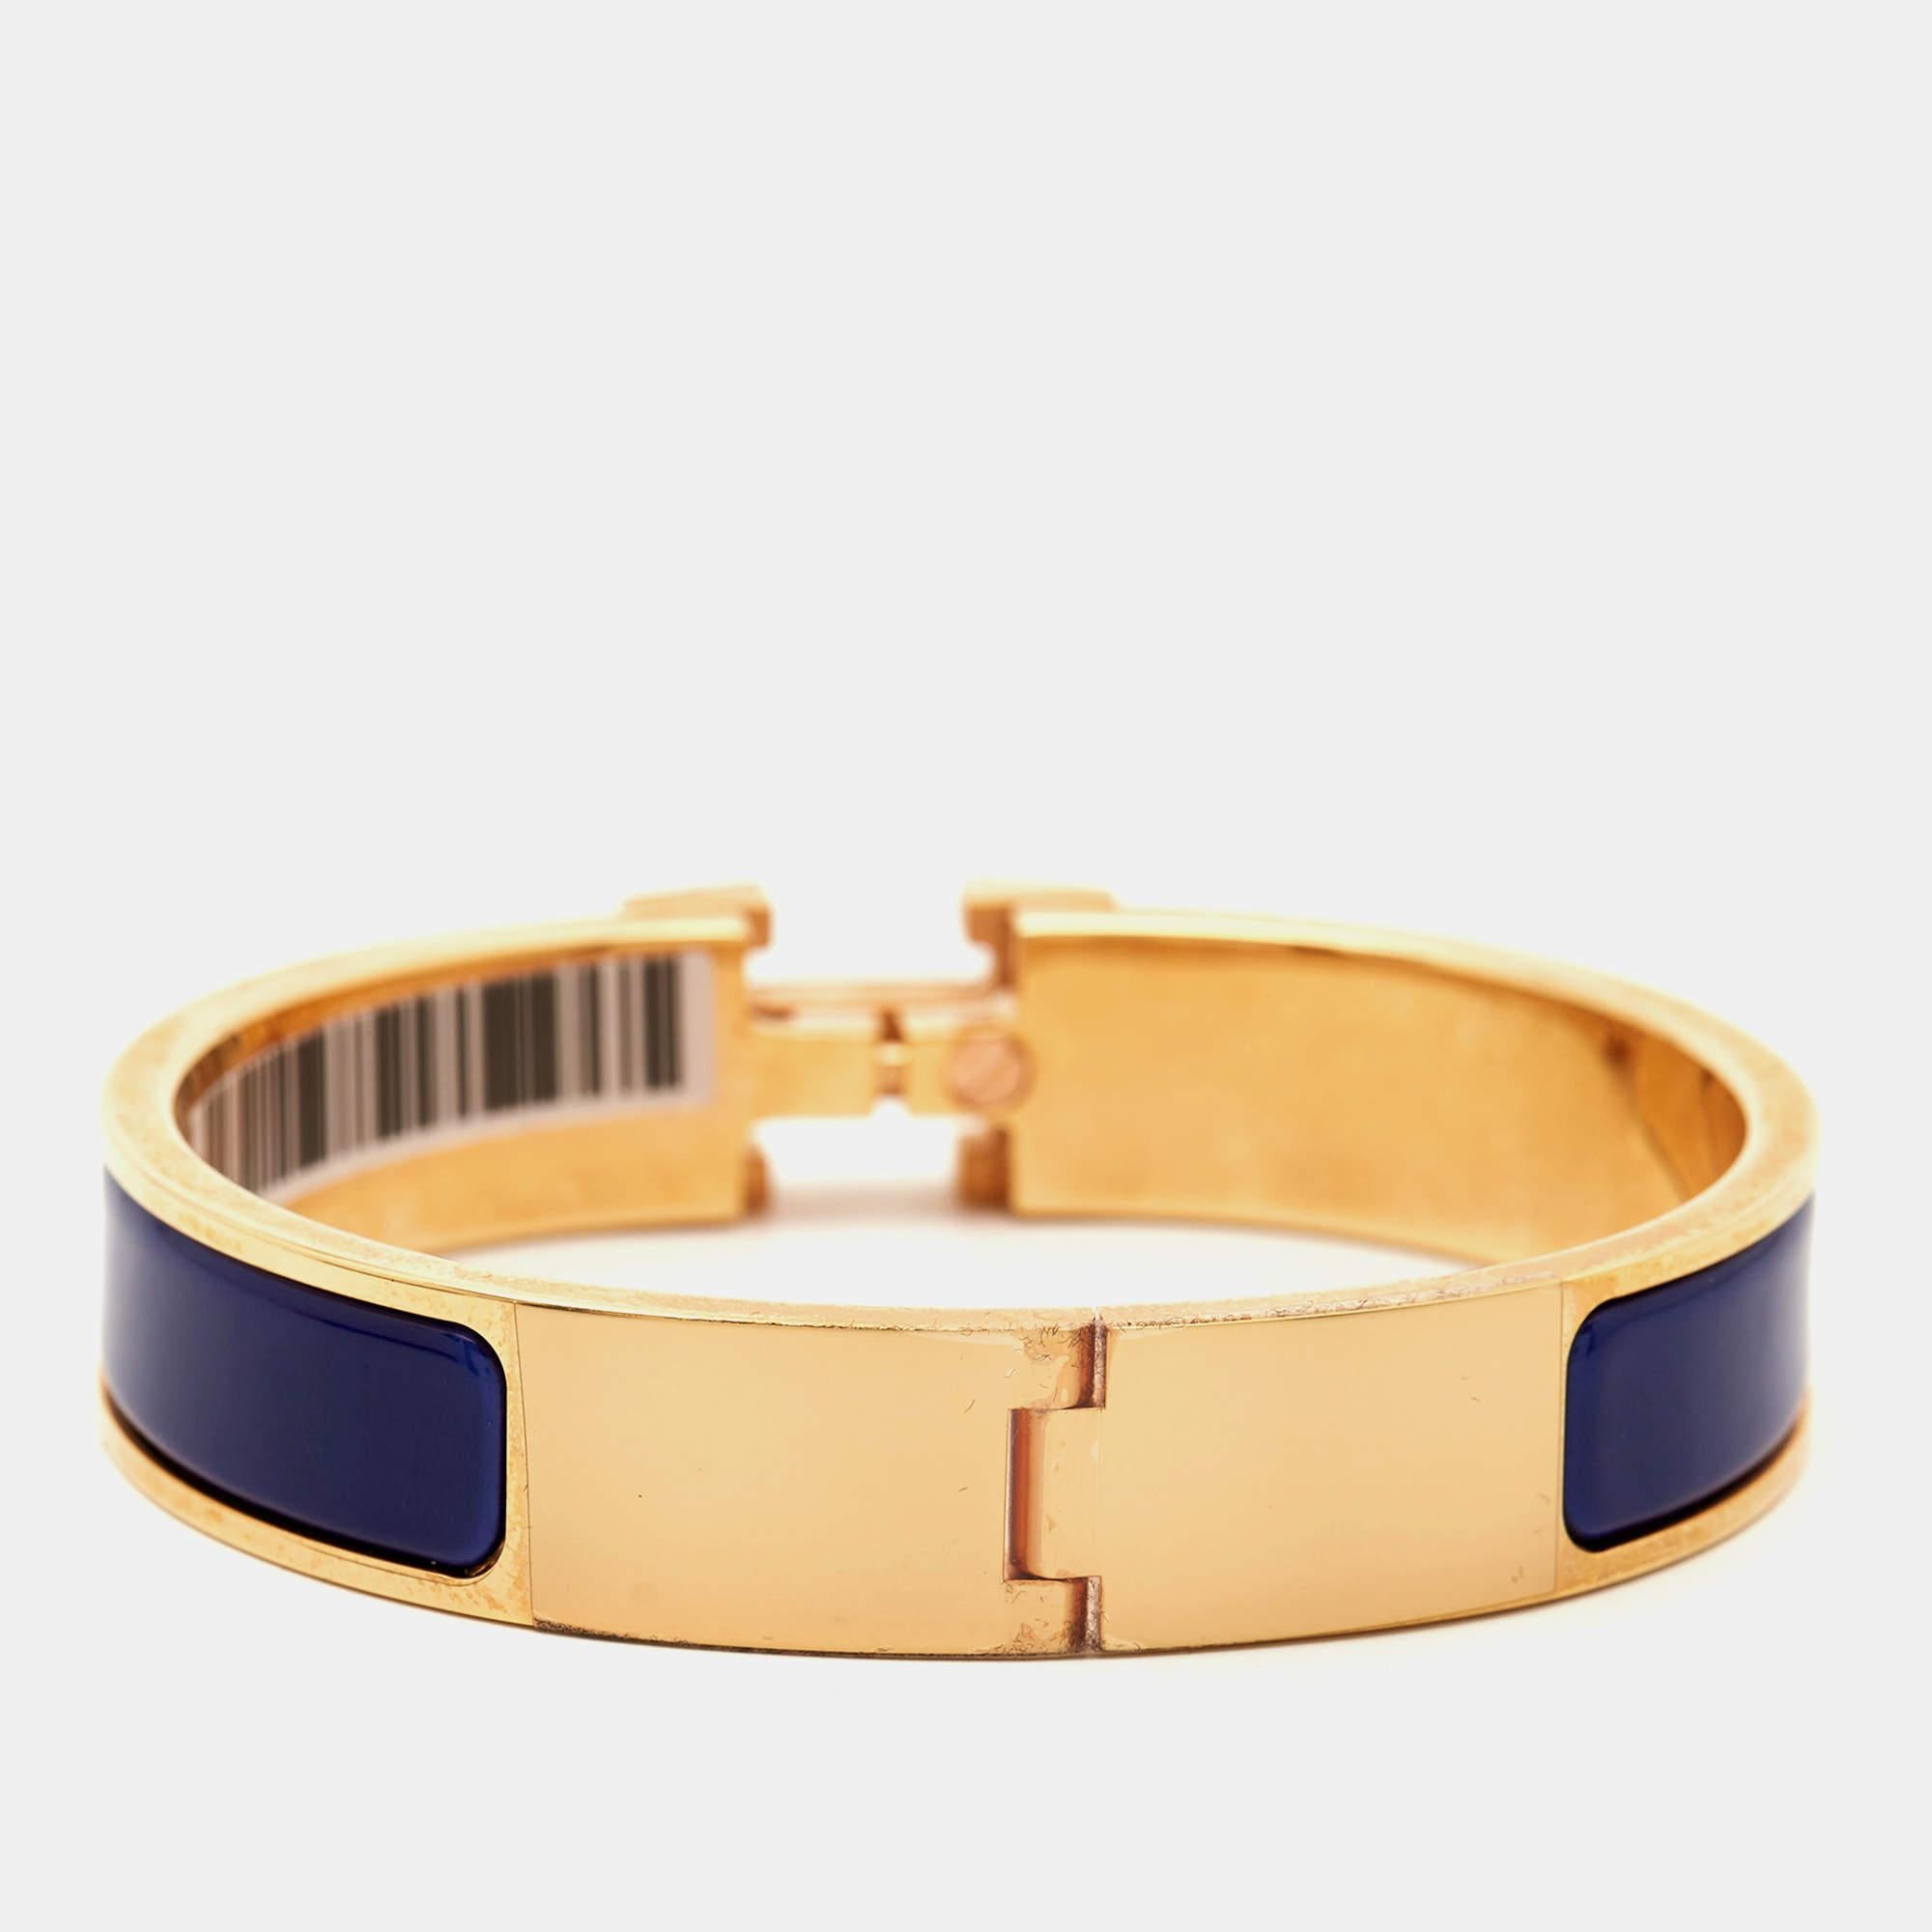 This beautiful Hermes Clic H bracelet is sure to stand out when it sits on your wrist. Crafted with precision, the fine bracelet will be an investment you'll love.

Includes: Original Box, Original Pouch, Info Booklet
